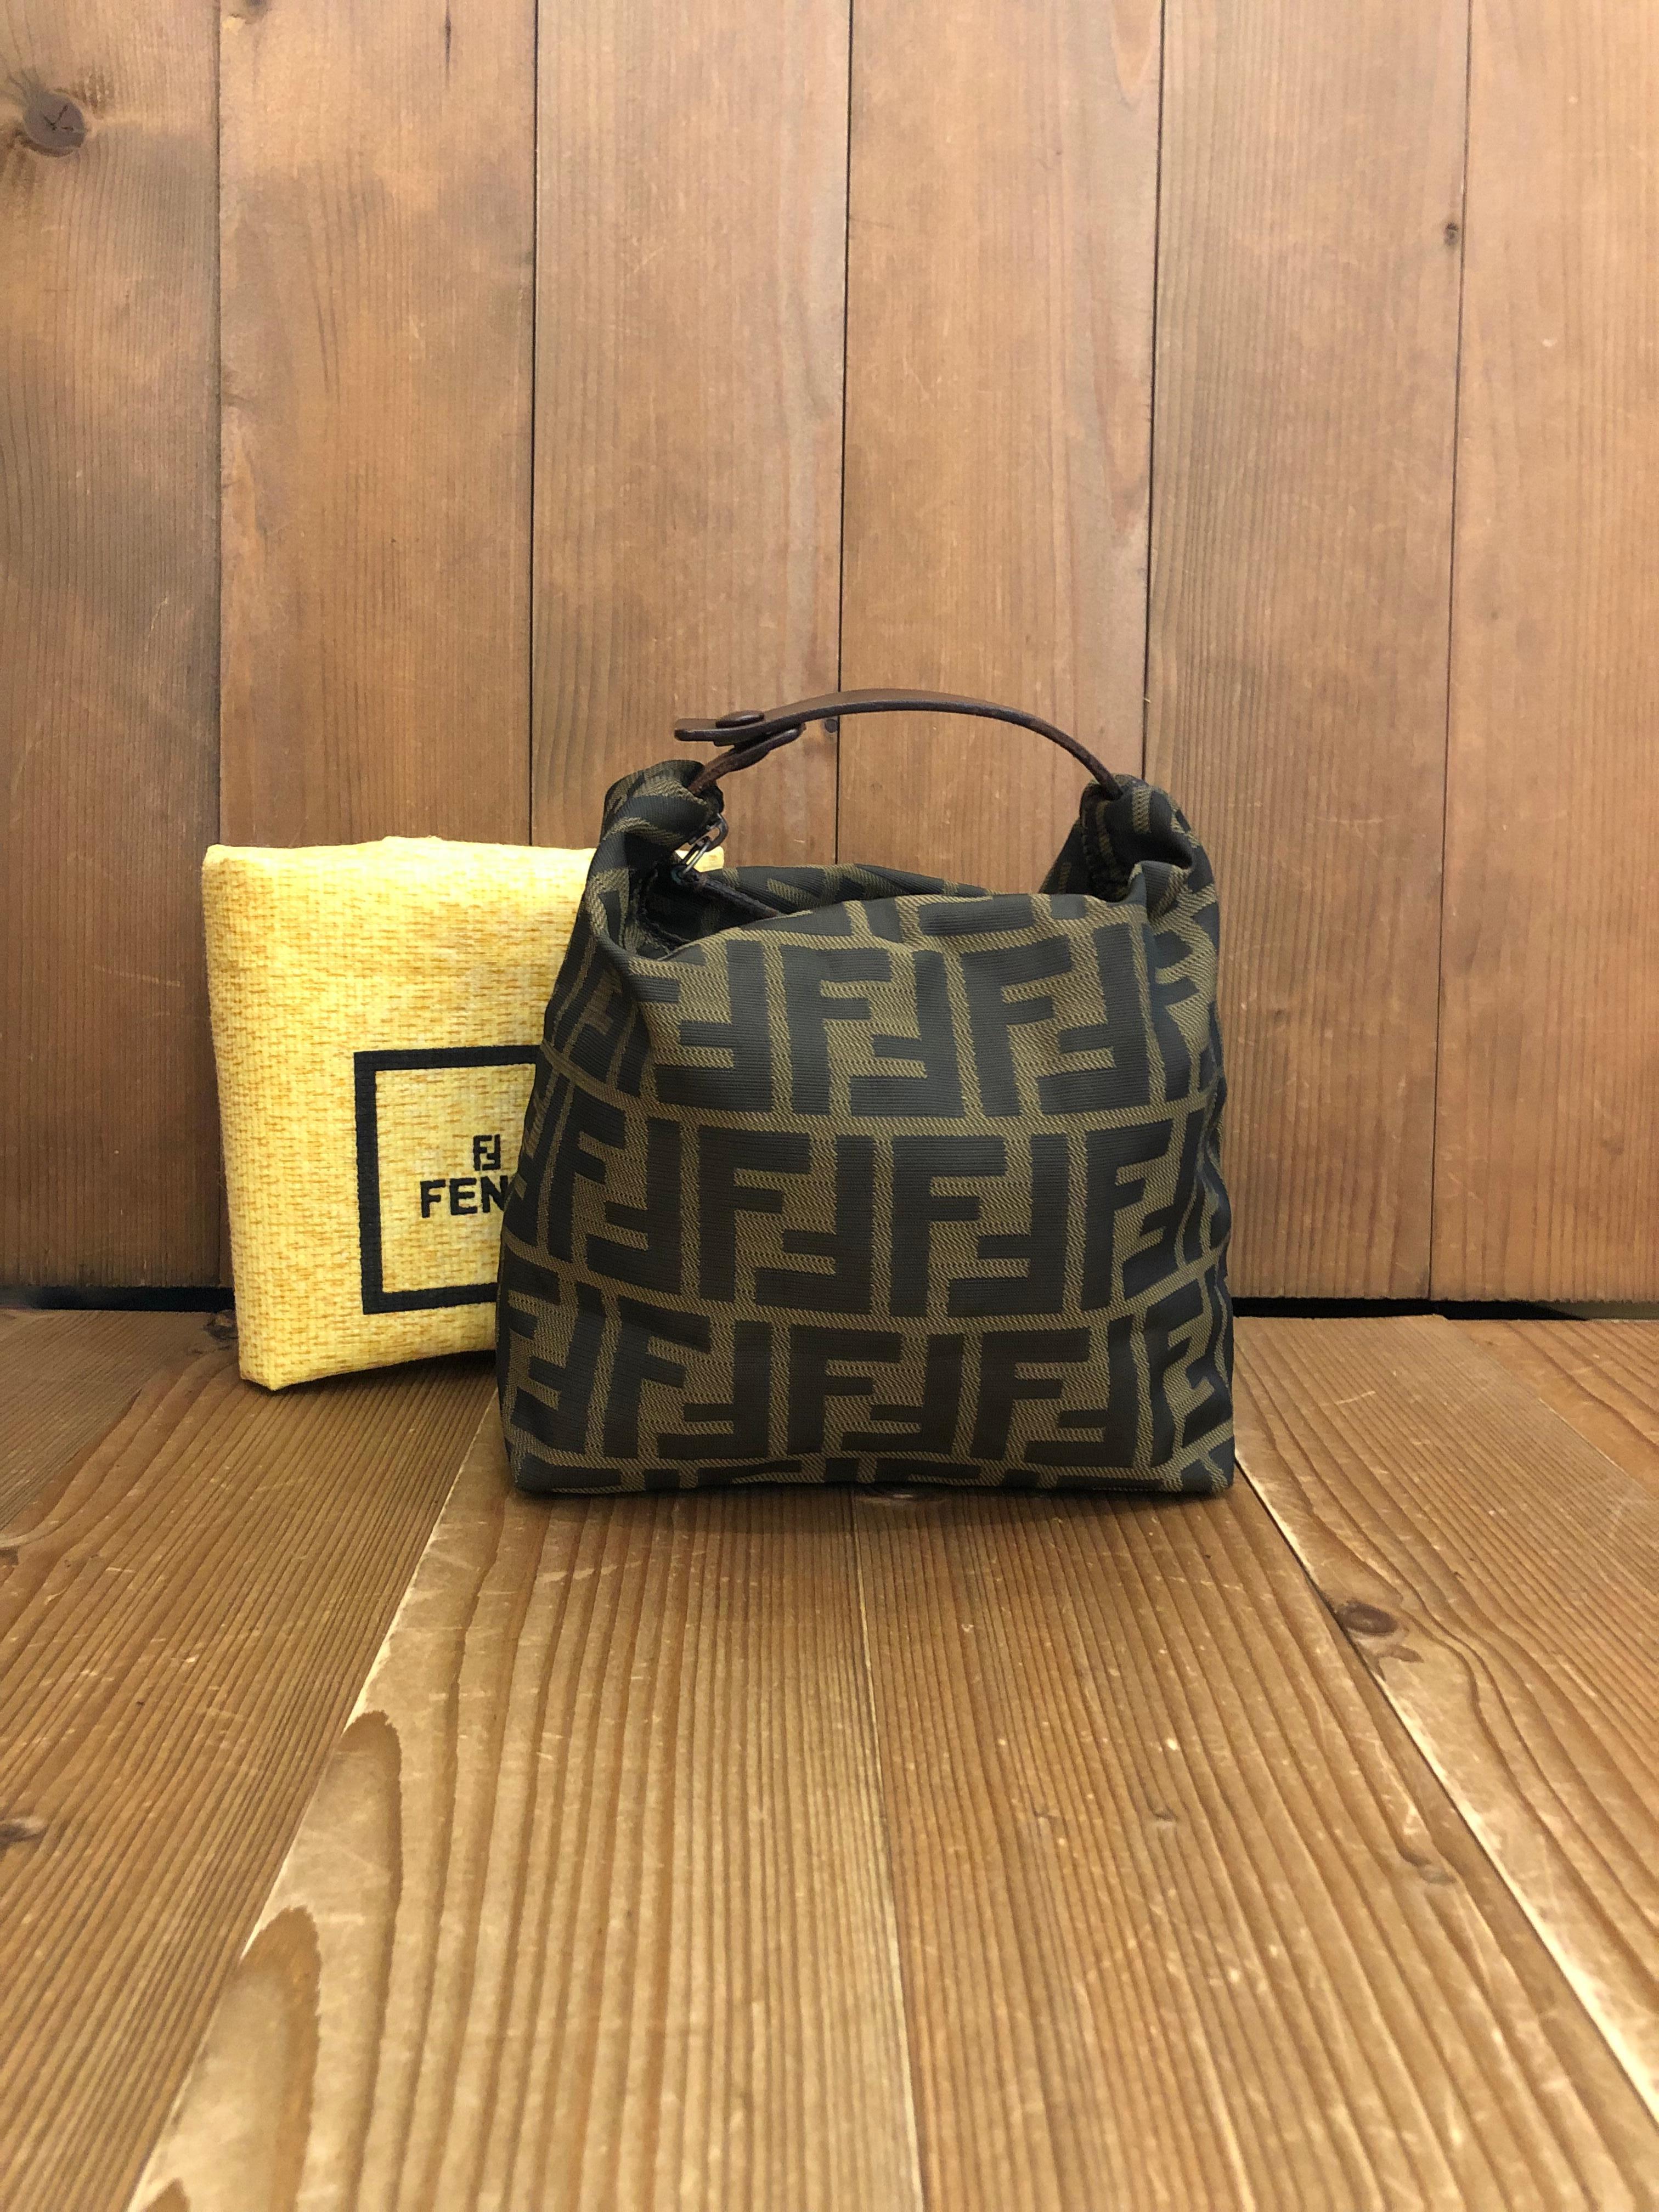 Vintage Fendi mini pouch handbag in Fendi's iconic brown Zucca jacquard. Zipper top and snap closure open to an un-lined interior. Made in Italy. Measures approximately 6.5 x 6.5 x 4.25 inches (fits plus-sized iPhone). Comes with